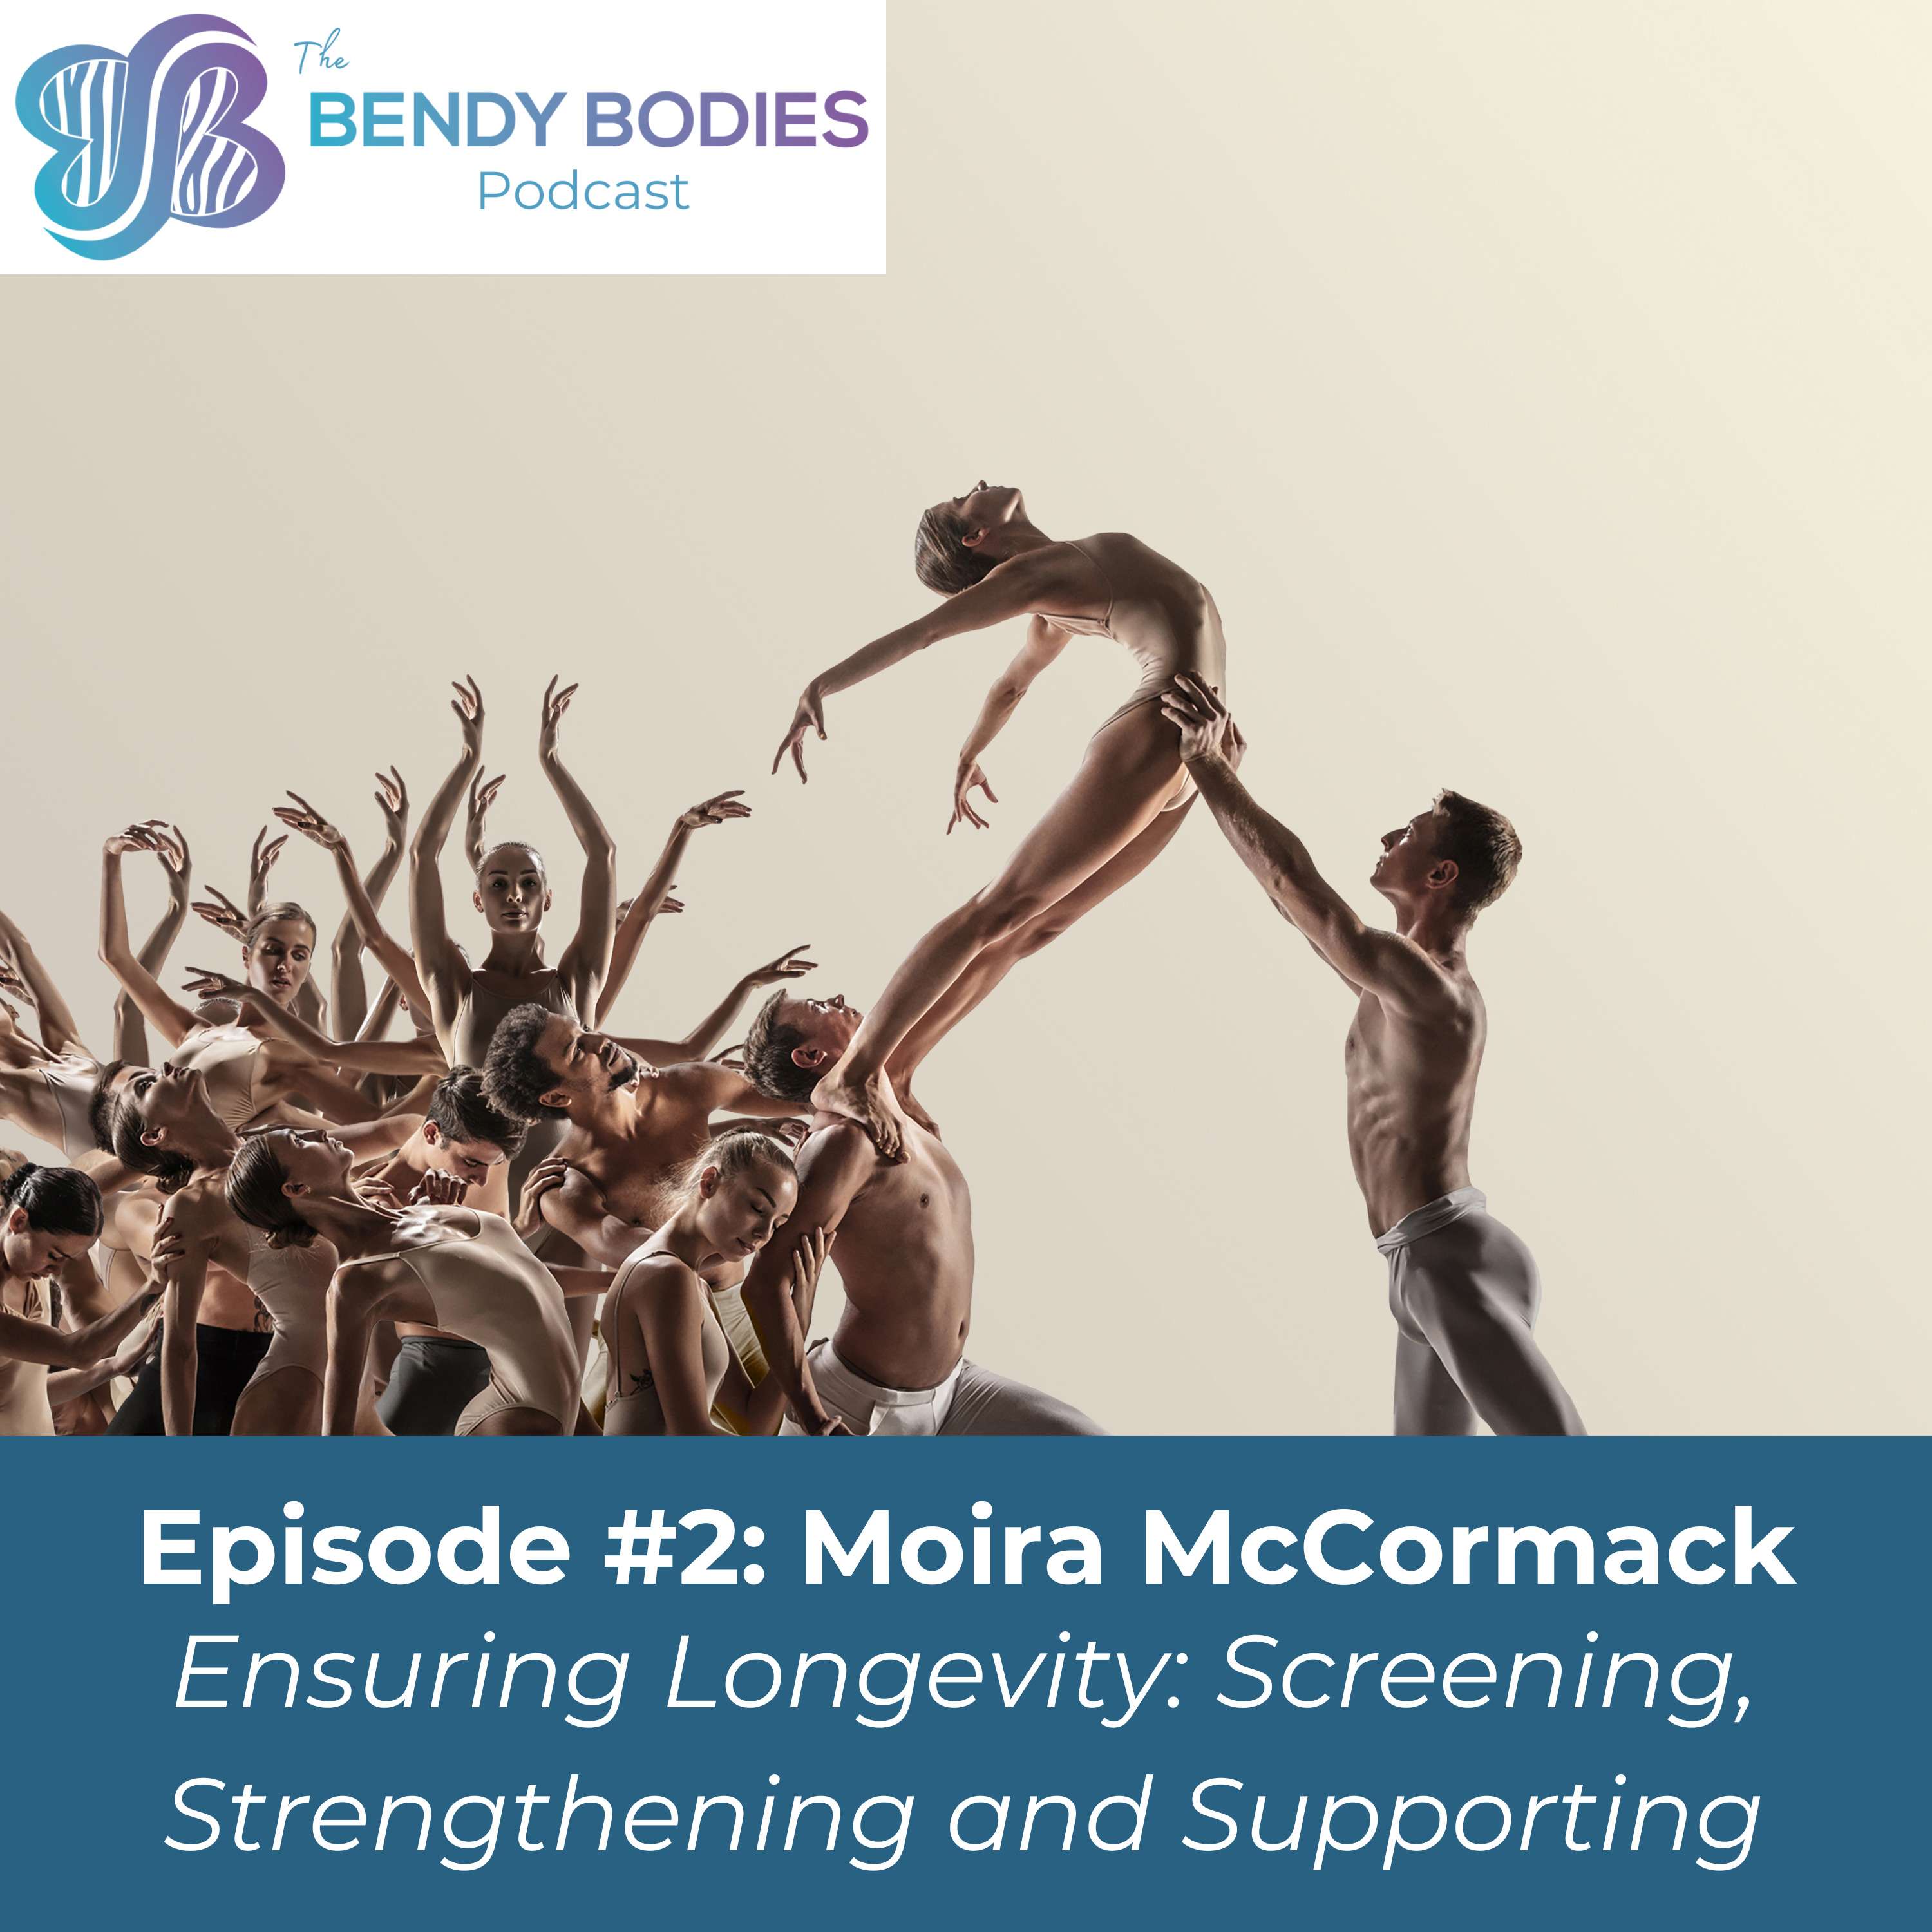 2. Ensuring Longevity: Screening, Strengthening and Supporting, with Physiotherapist Moira McCormack